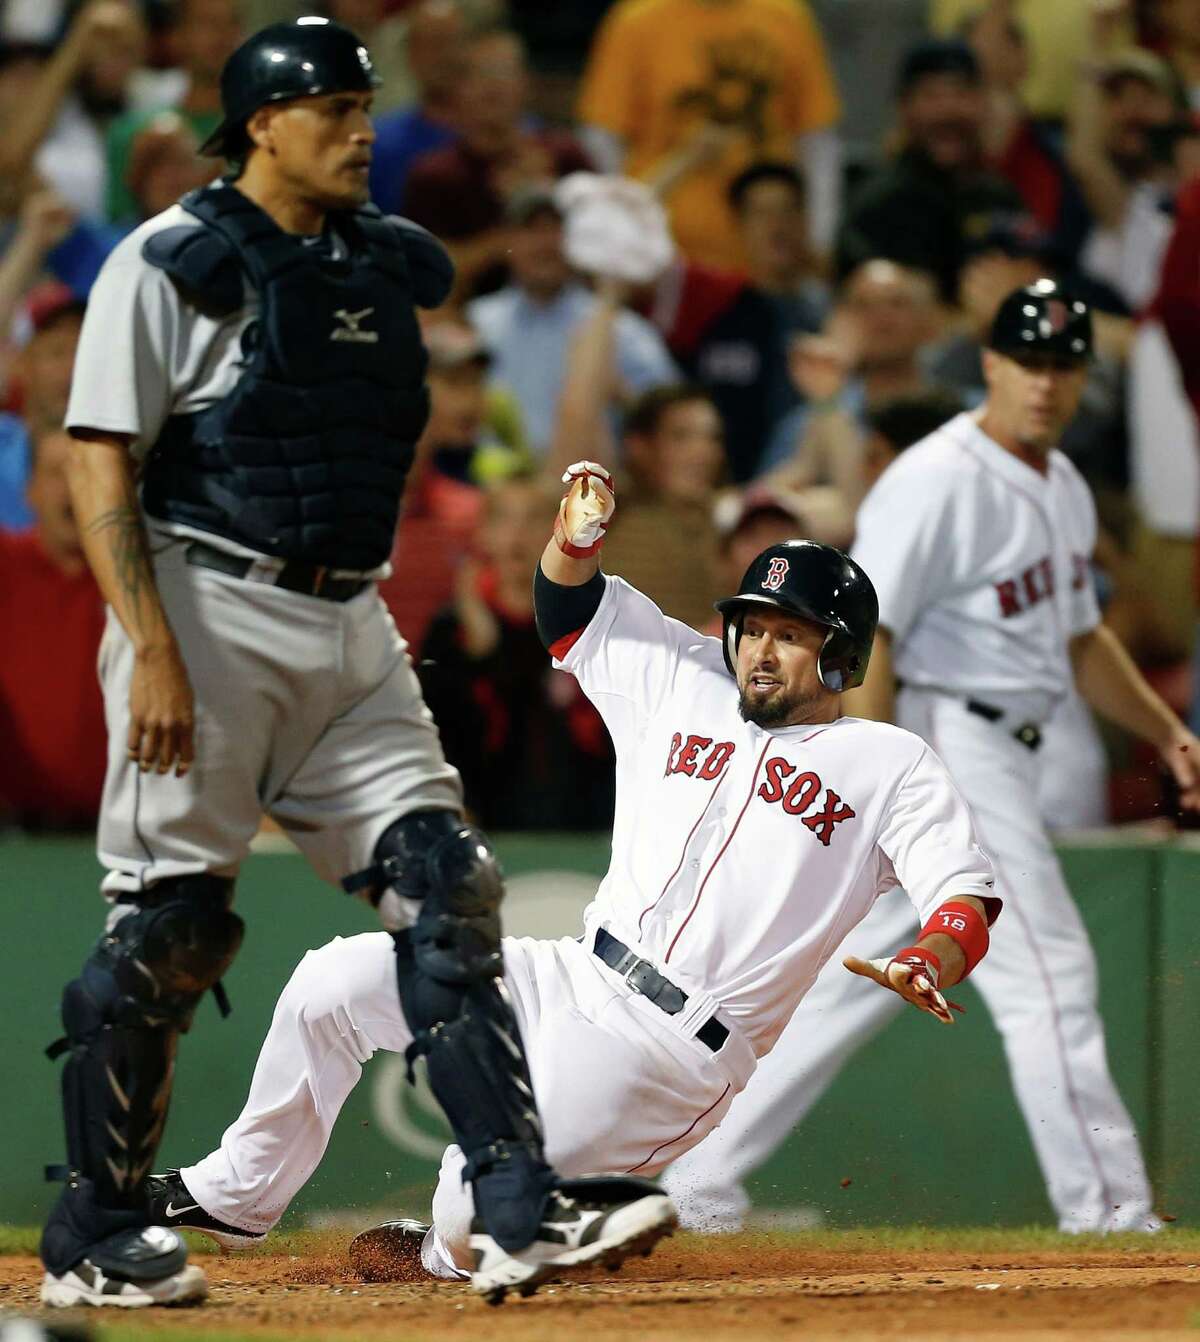 Shane Victorino was the last man to cross the plate in Boston on Thursday, as he scored the winning run in the Red Sox's walkoff win over the Mariners.